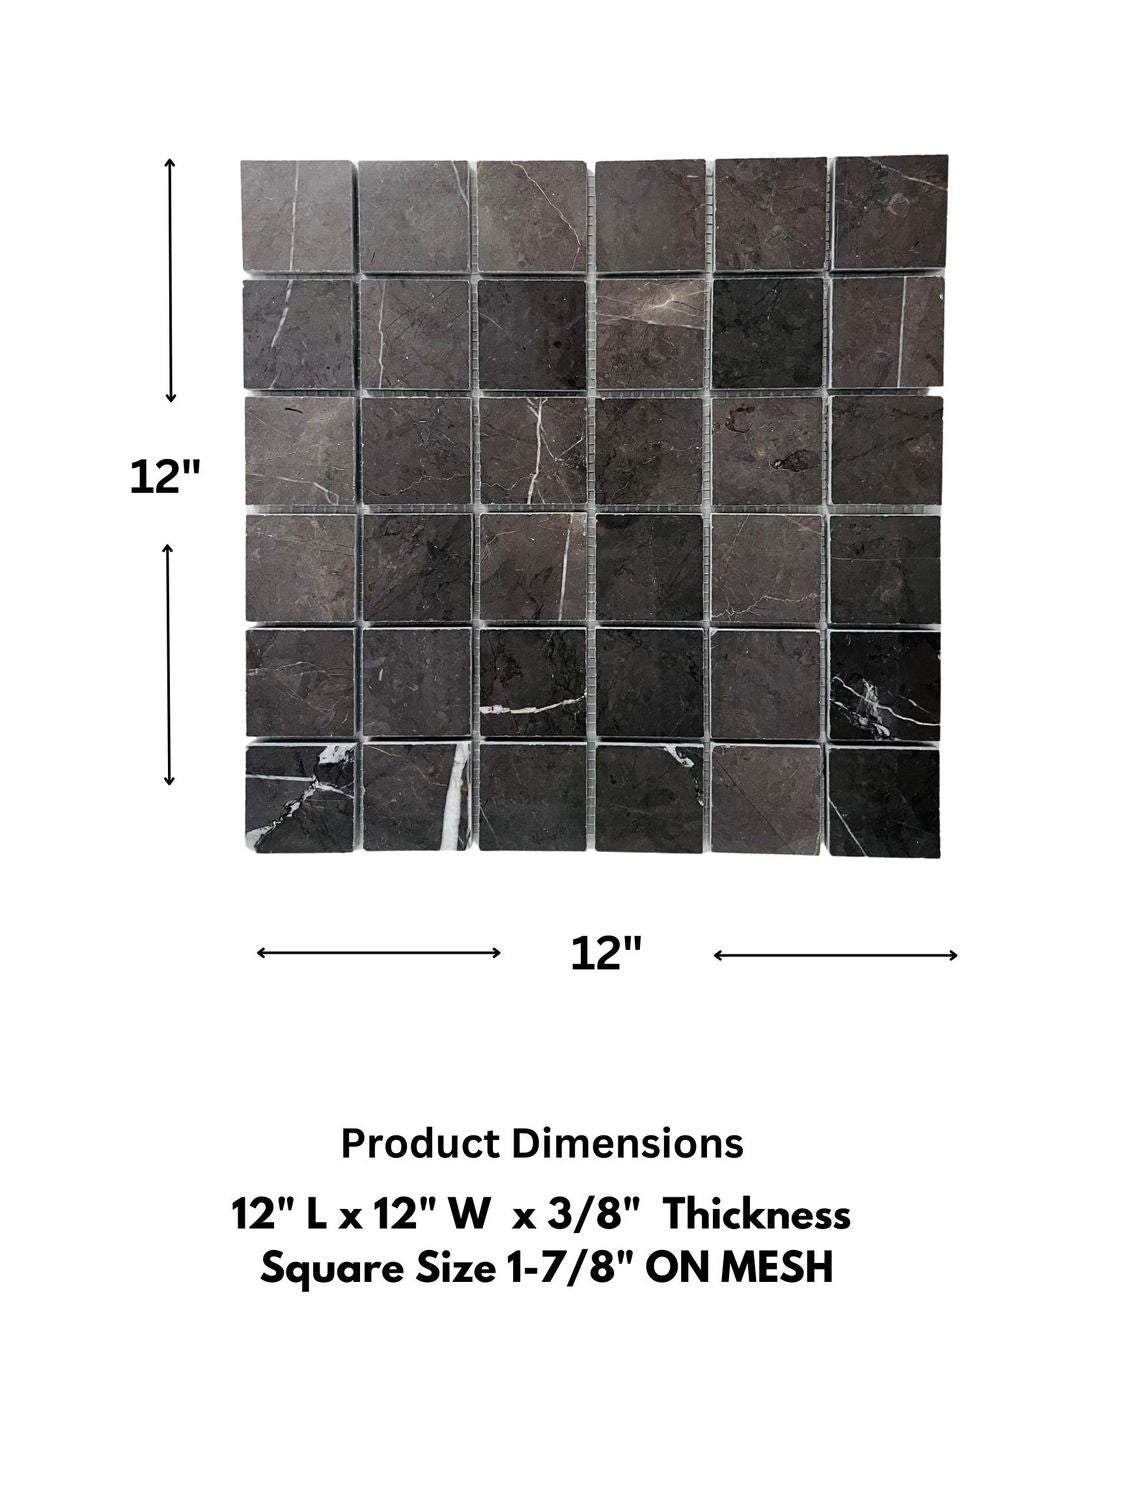 Tenedos TOTTD-SRQ-MBLR Pietra Gray Charcoal Square 2x2 Polished Marble Flooring Wall Tile for Kitchen Backsplash, Bathroom Wall, Accent Wall, Fireplace Surround